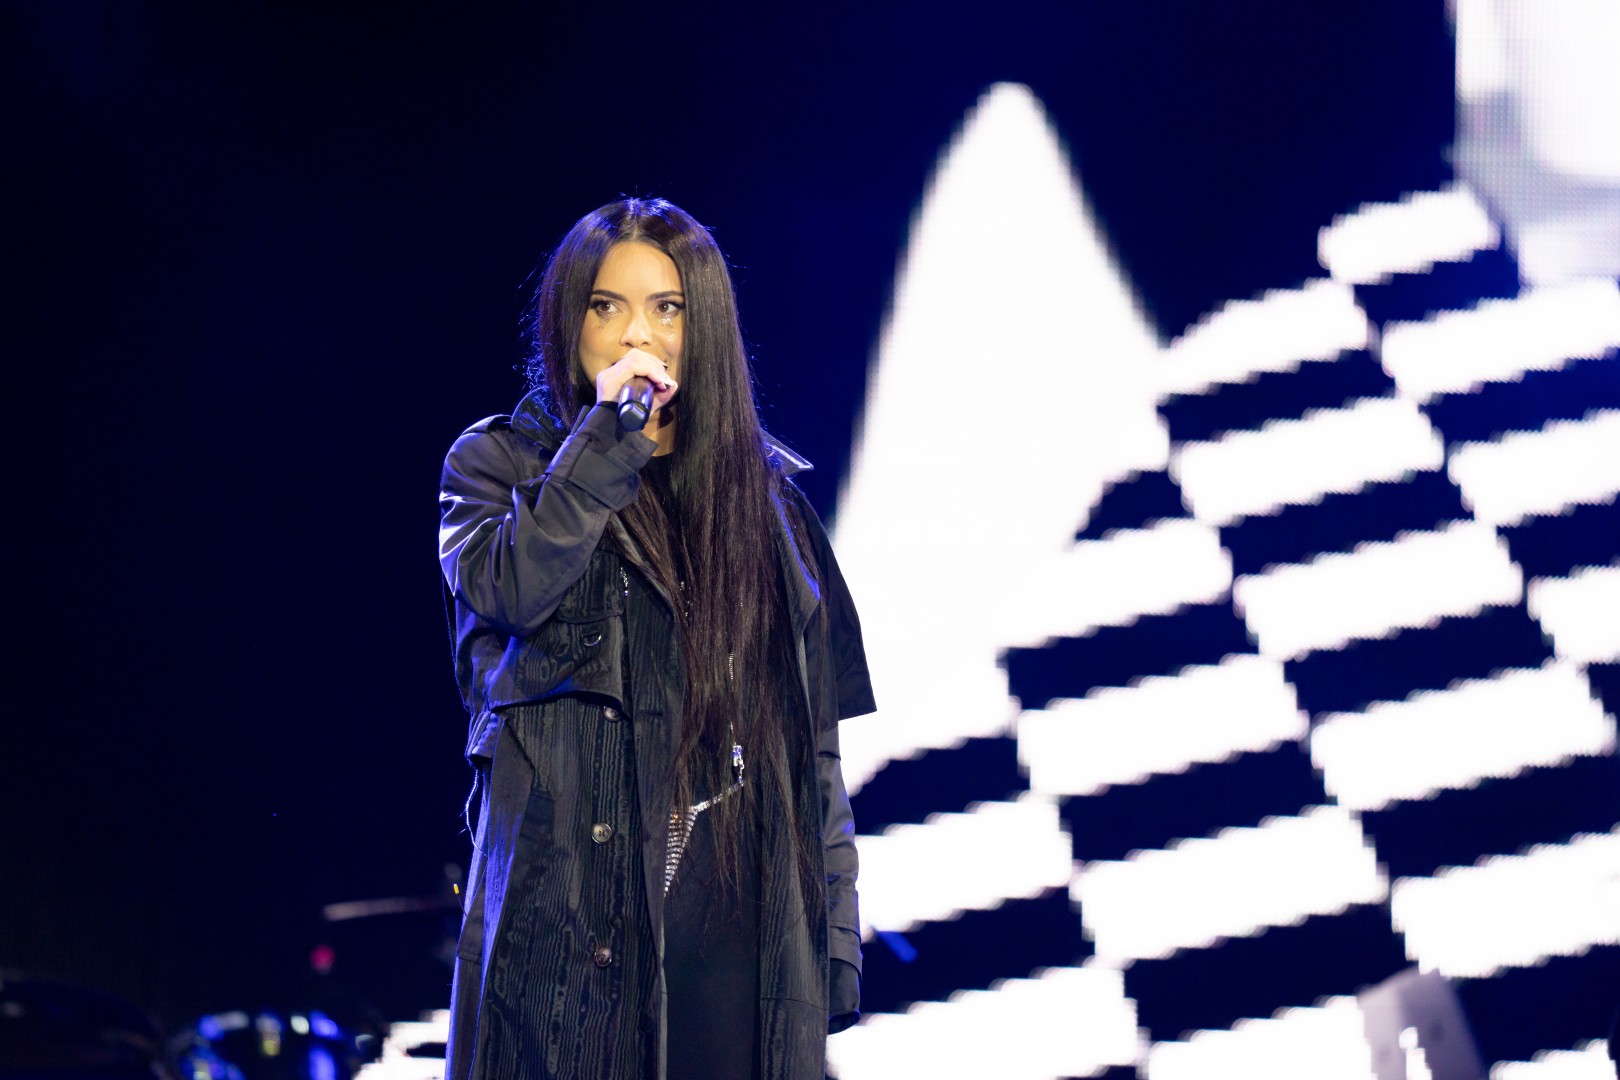 INNA at National Arena in Bucharest on March 12, 2022 (a2a10ccff6)